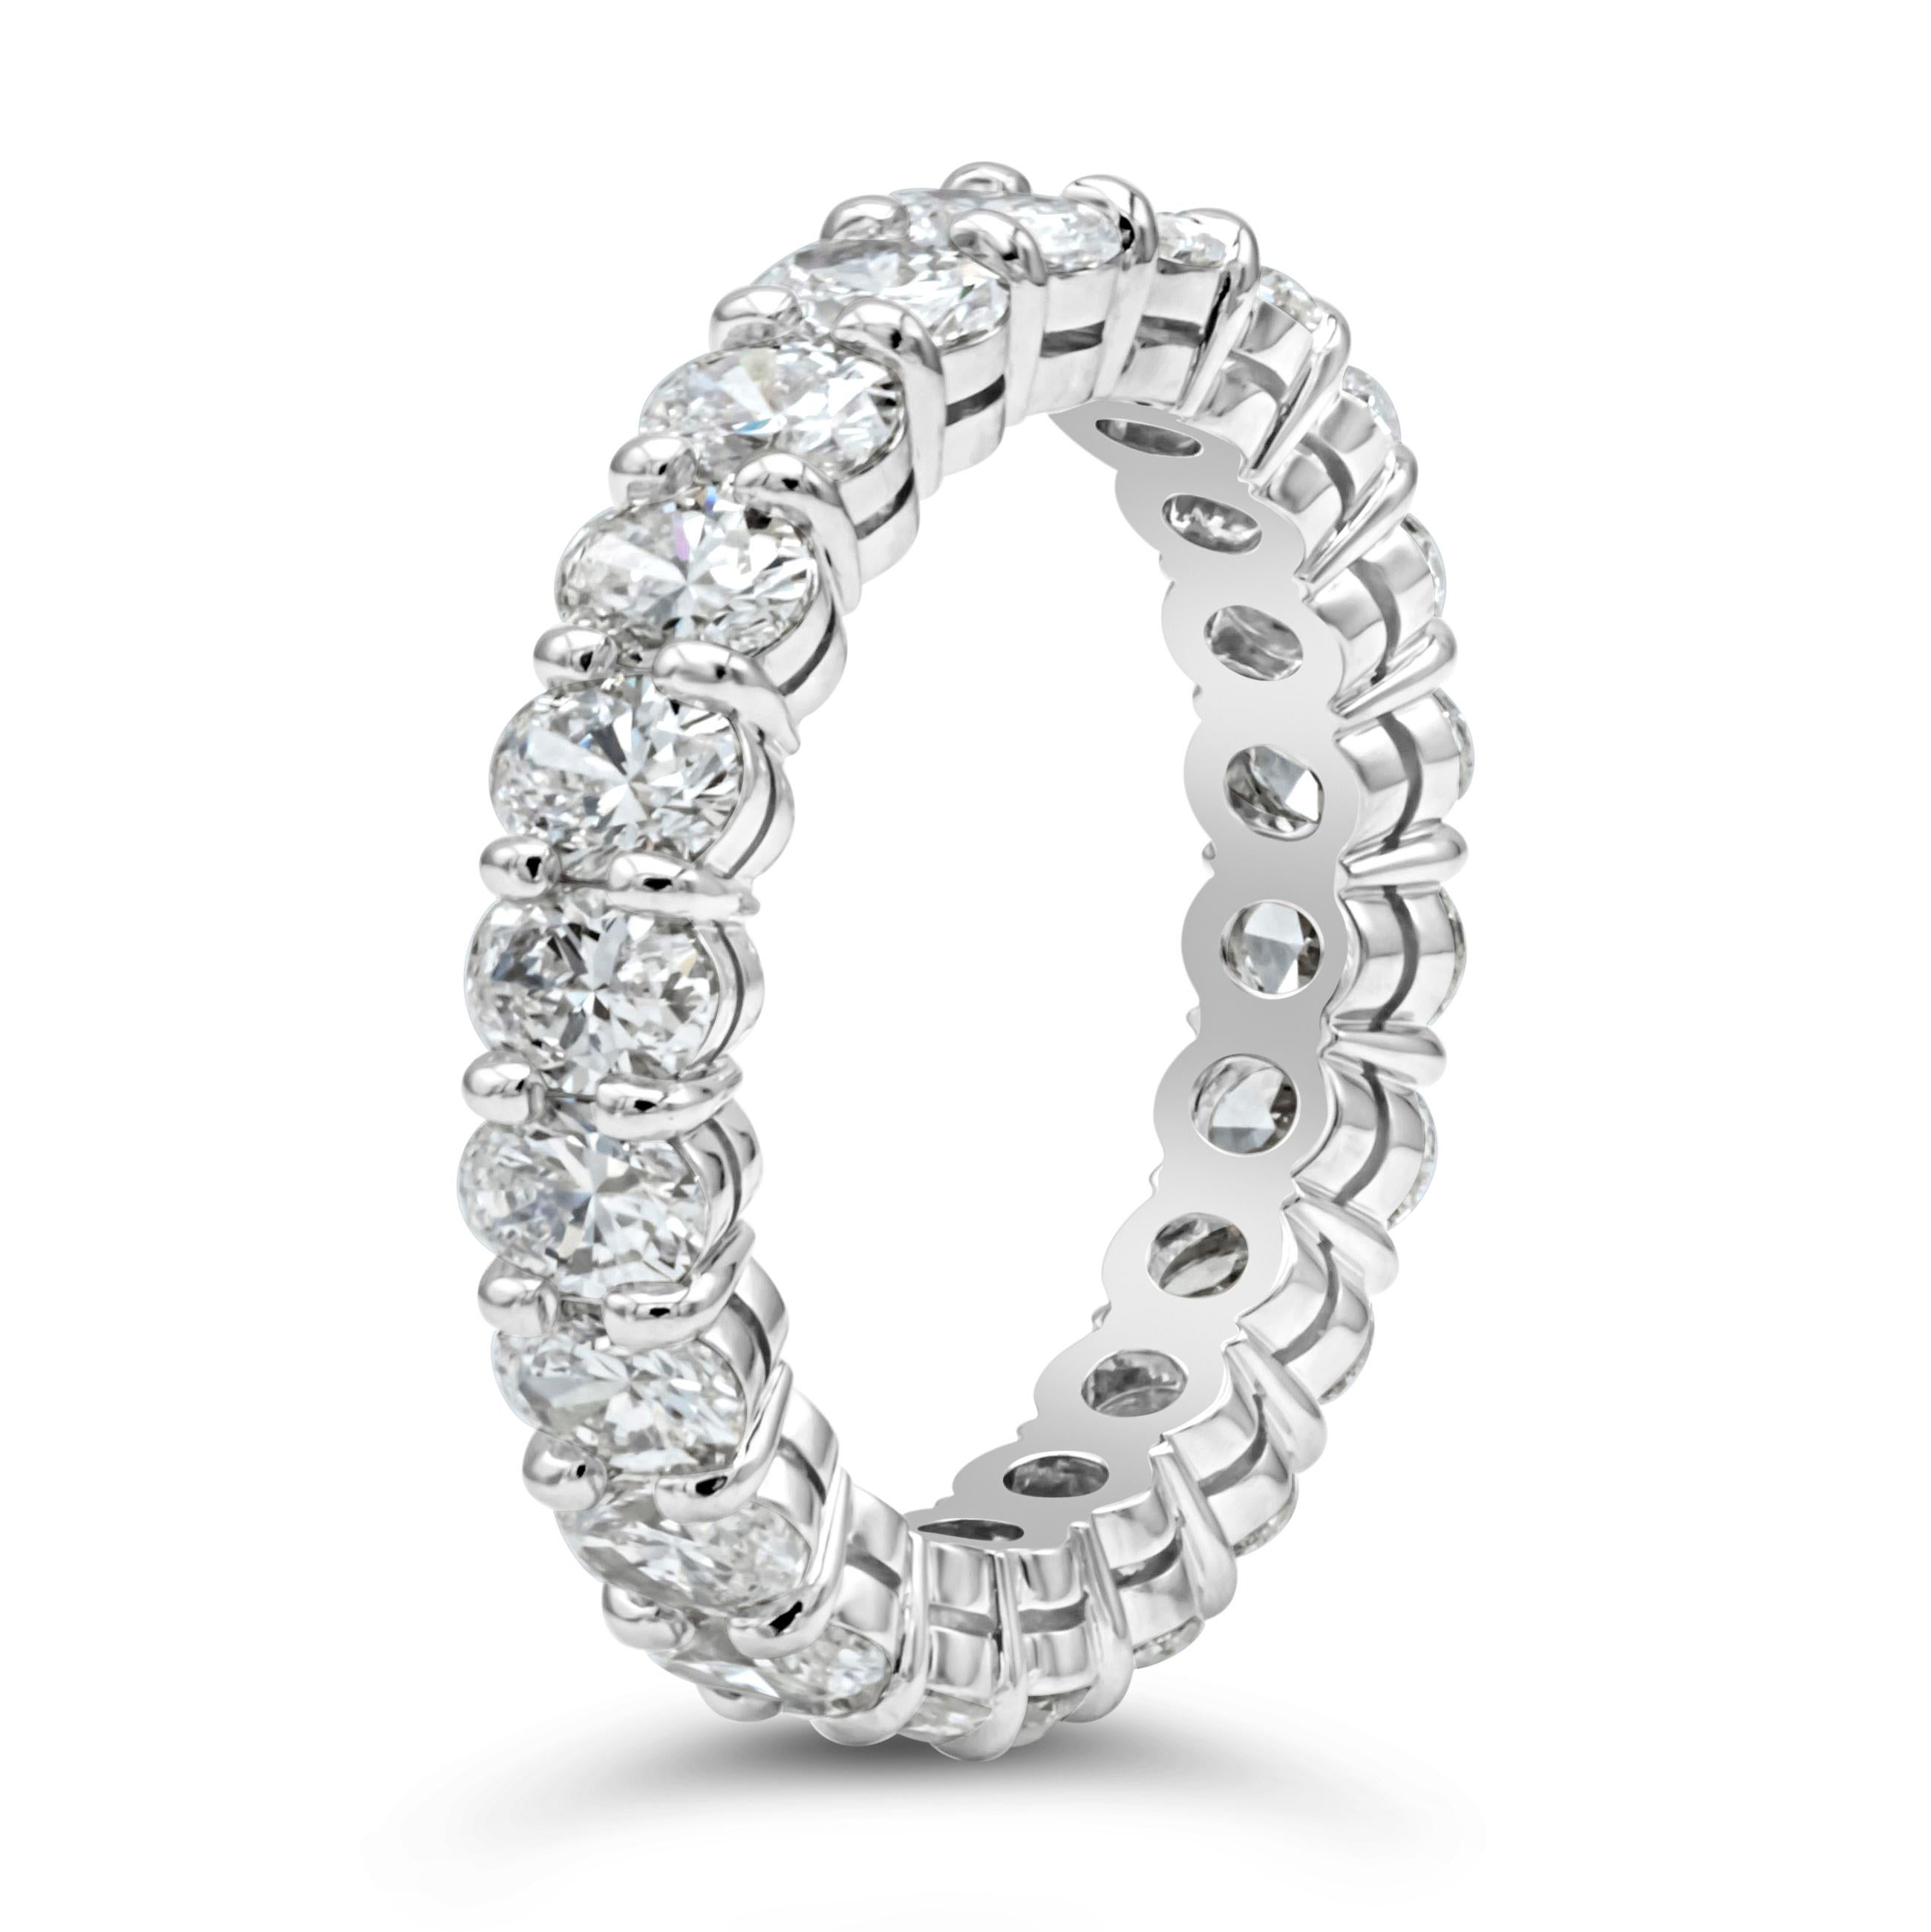 A timeless and classic eternity wedding band showcasing 22 pieces of sparkling oval cut diamonds weighing 3.18 carats total, E-F color and VS-SI in clarity. Beautifully set in a shared two prong setting, Made in Platinum.

Roman Malakov is a custom